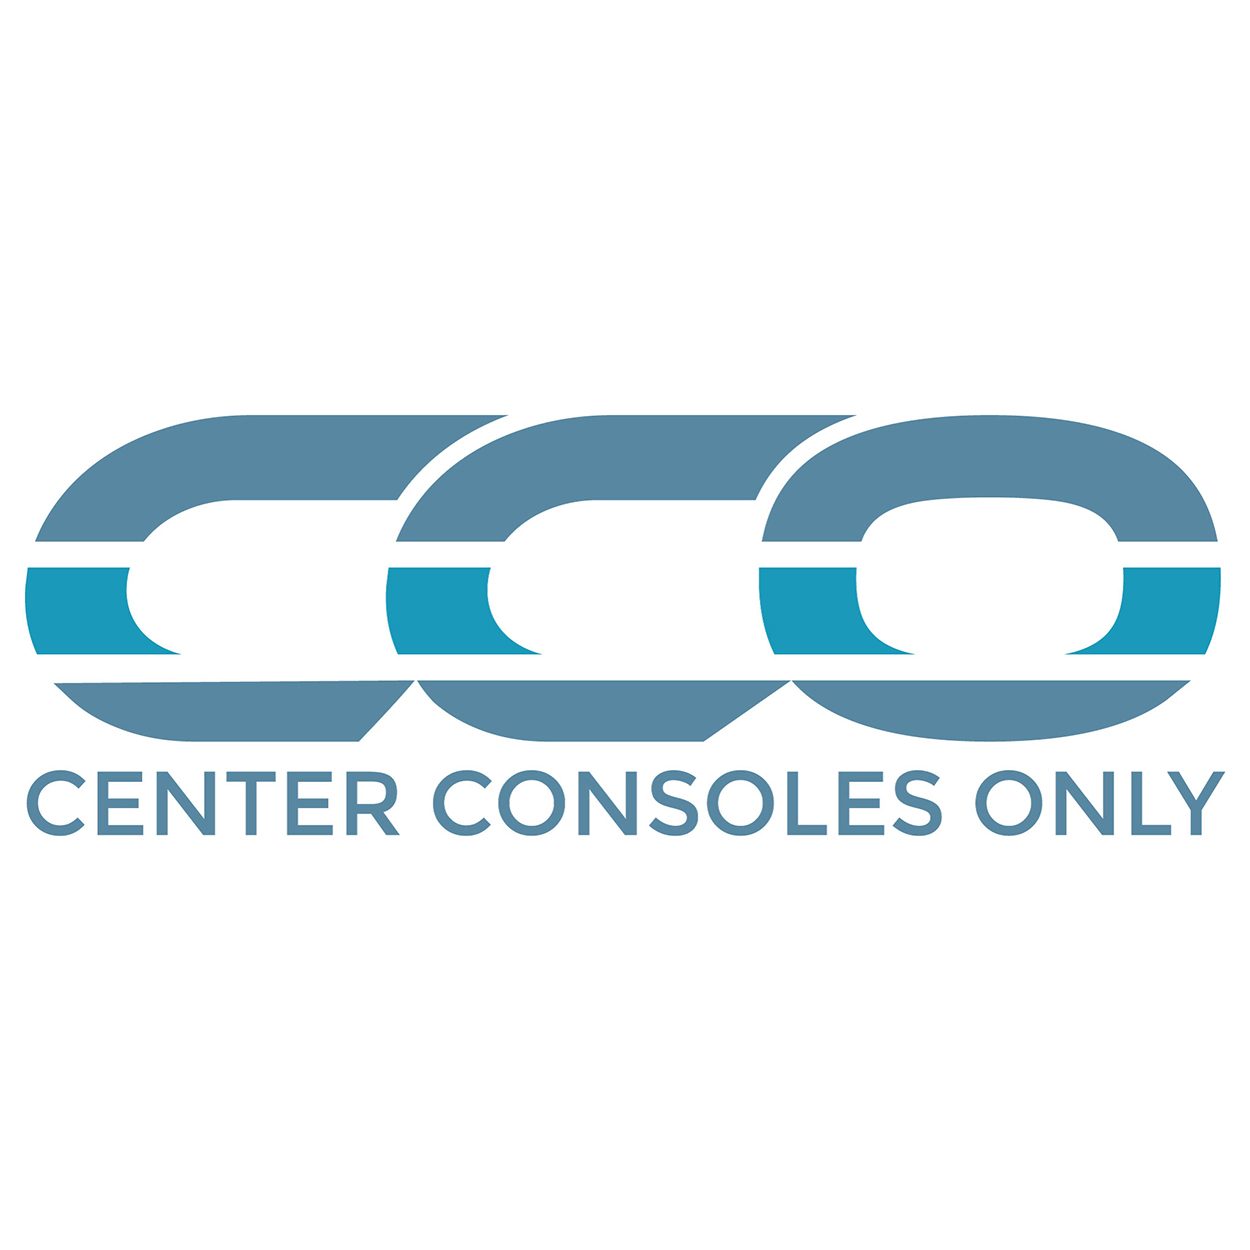 Center Consoles Only logo